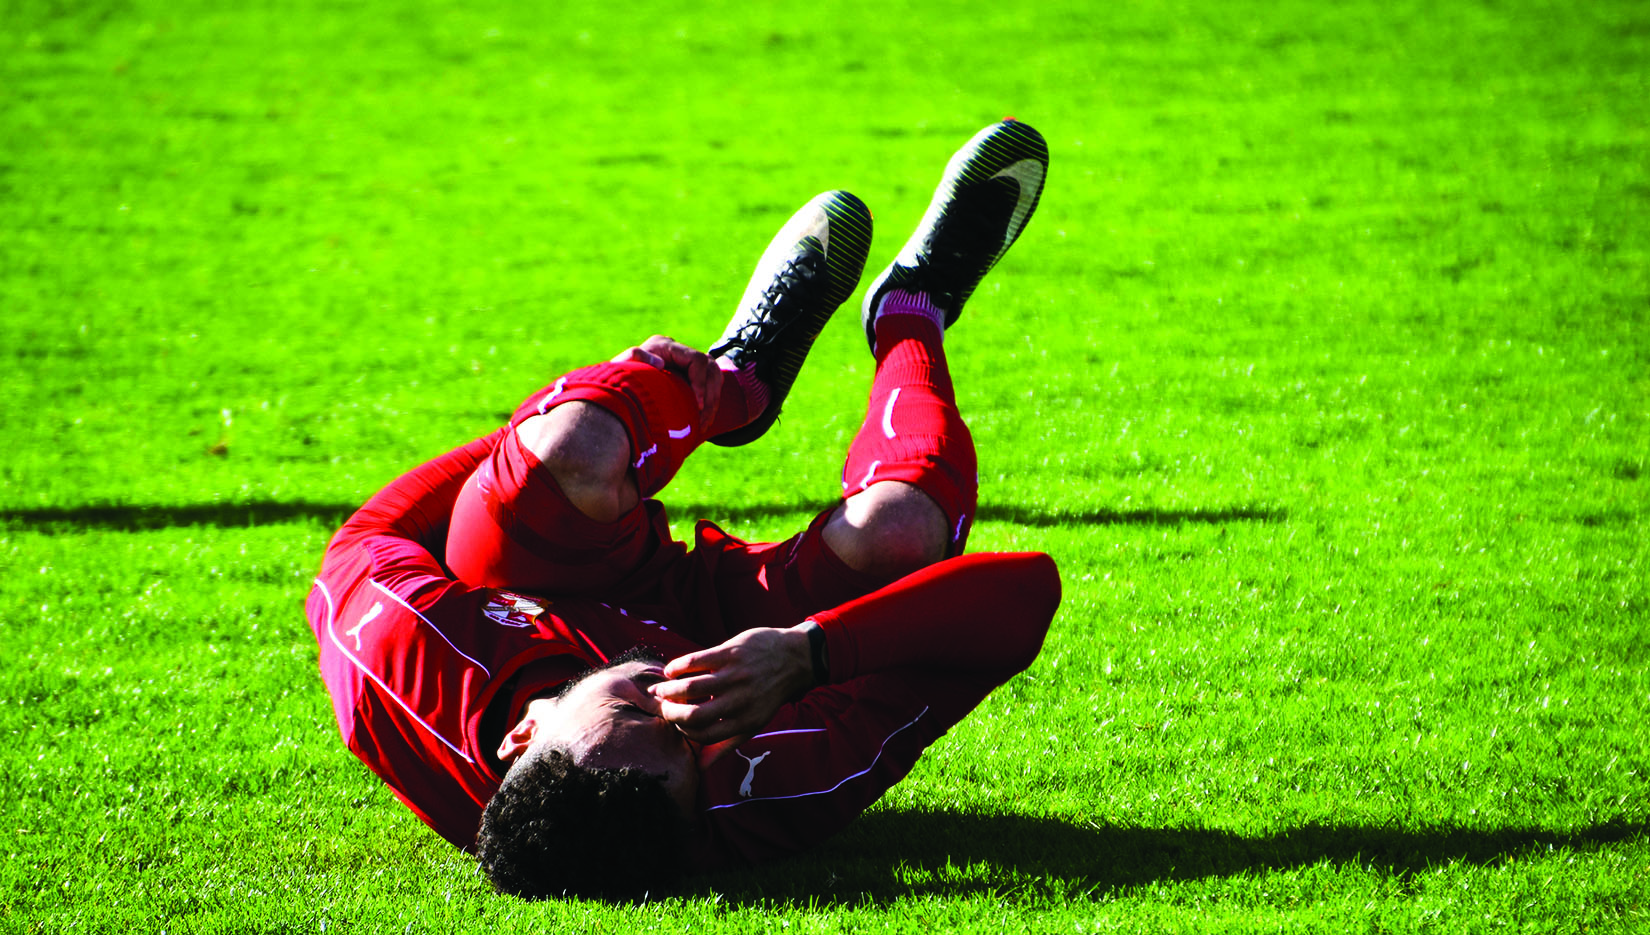 Sports Injury Prevention For Athletes and ‘Weekend Warriors’      By Cary Orthopaedic